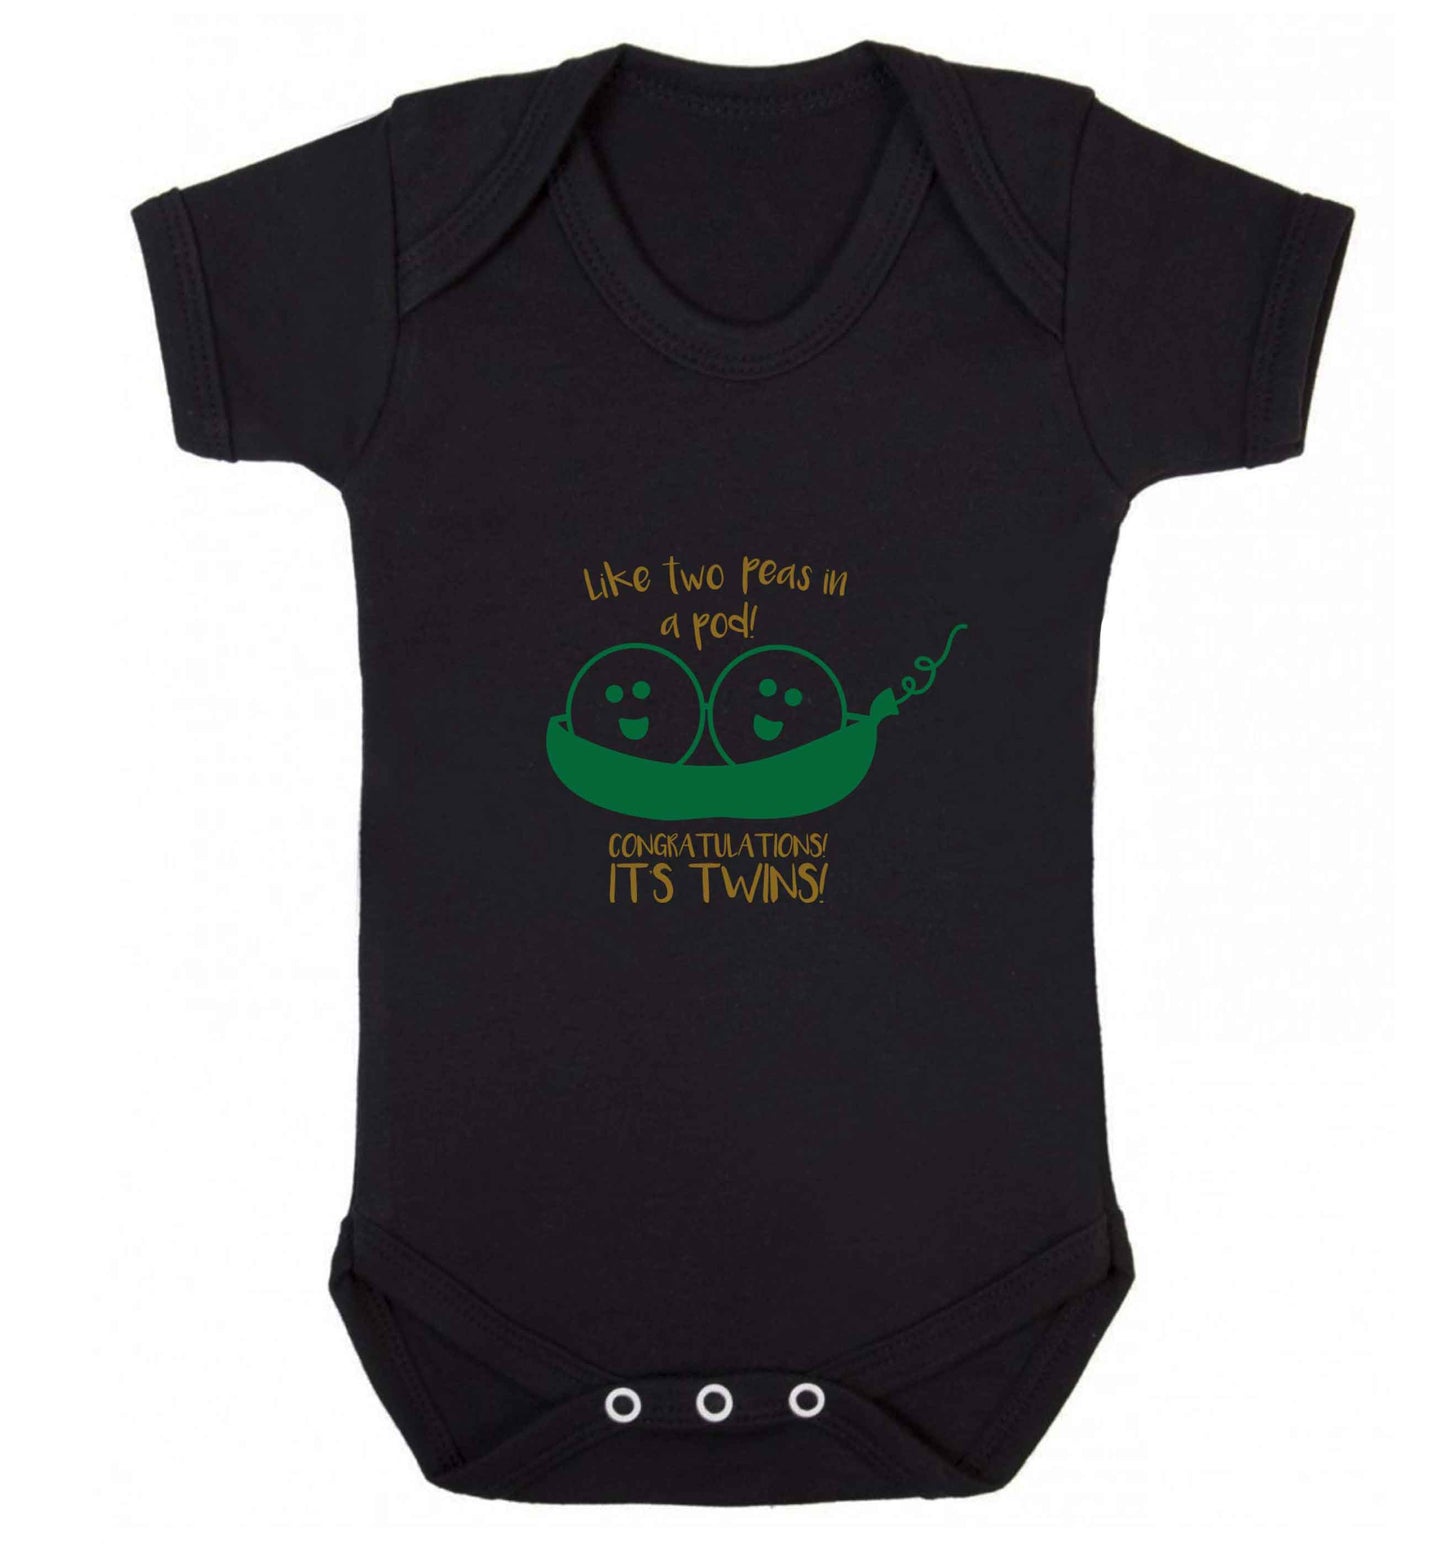 Like two peas in a pod! Congratulations it's twins! baby vest black 18-24 months